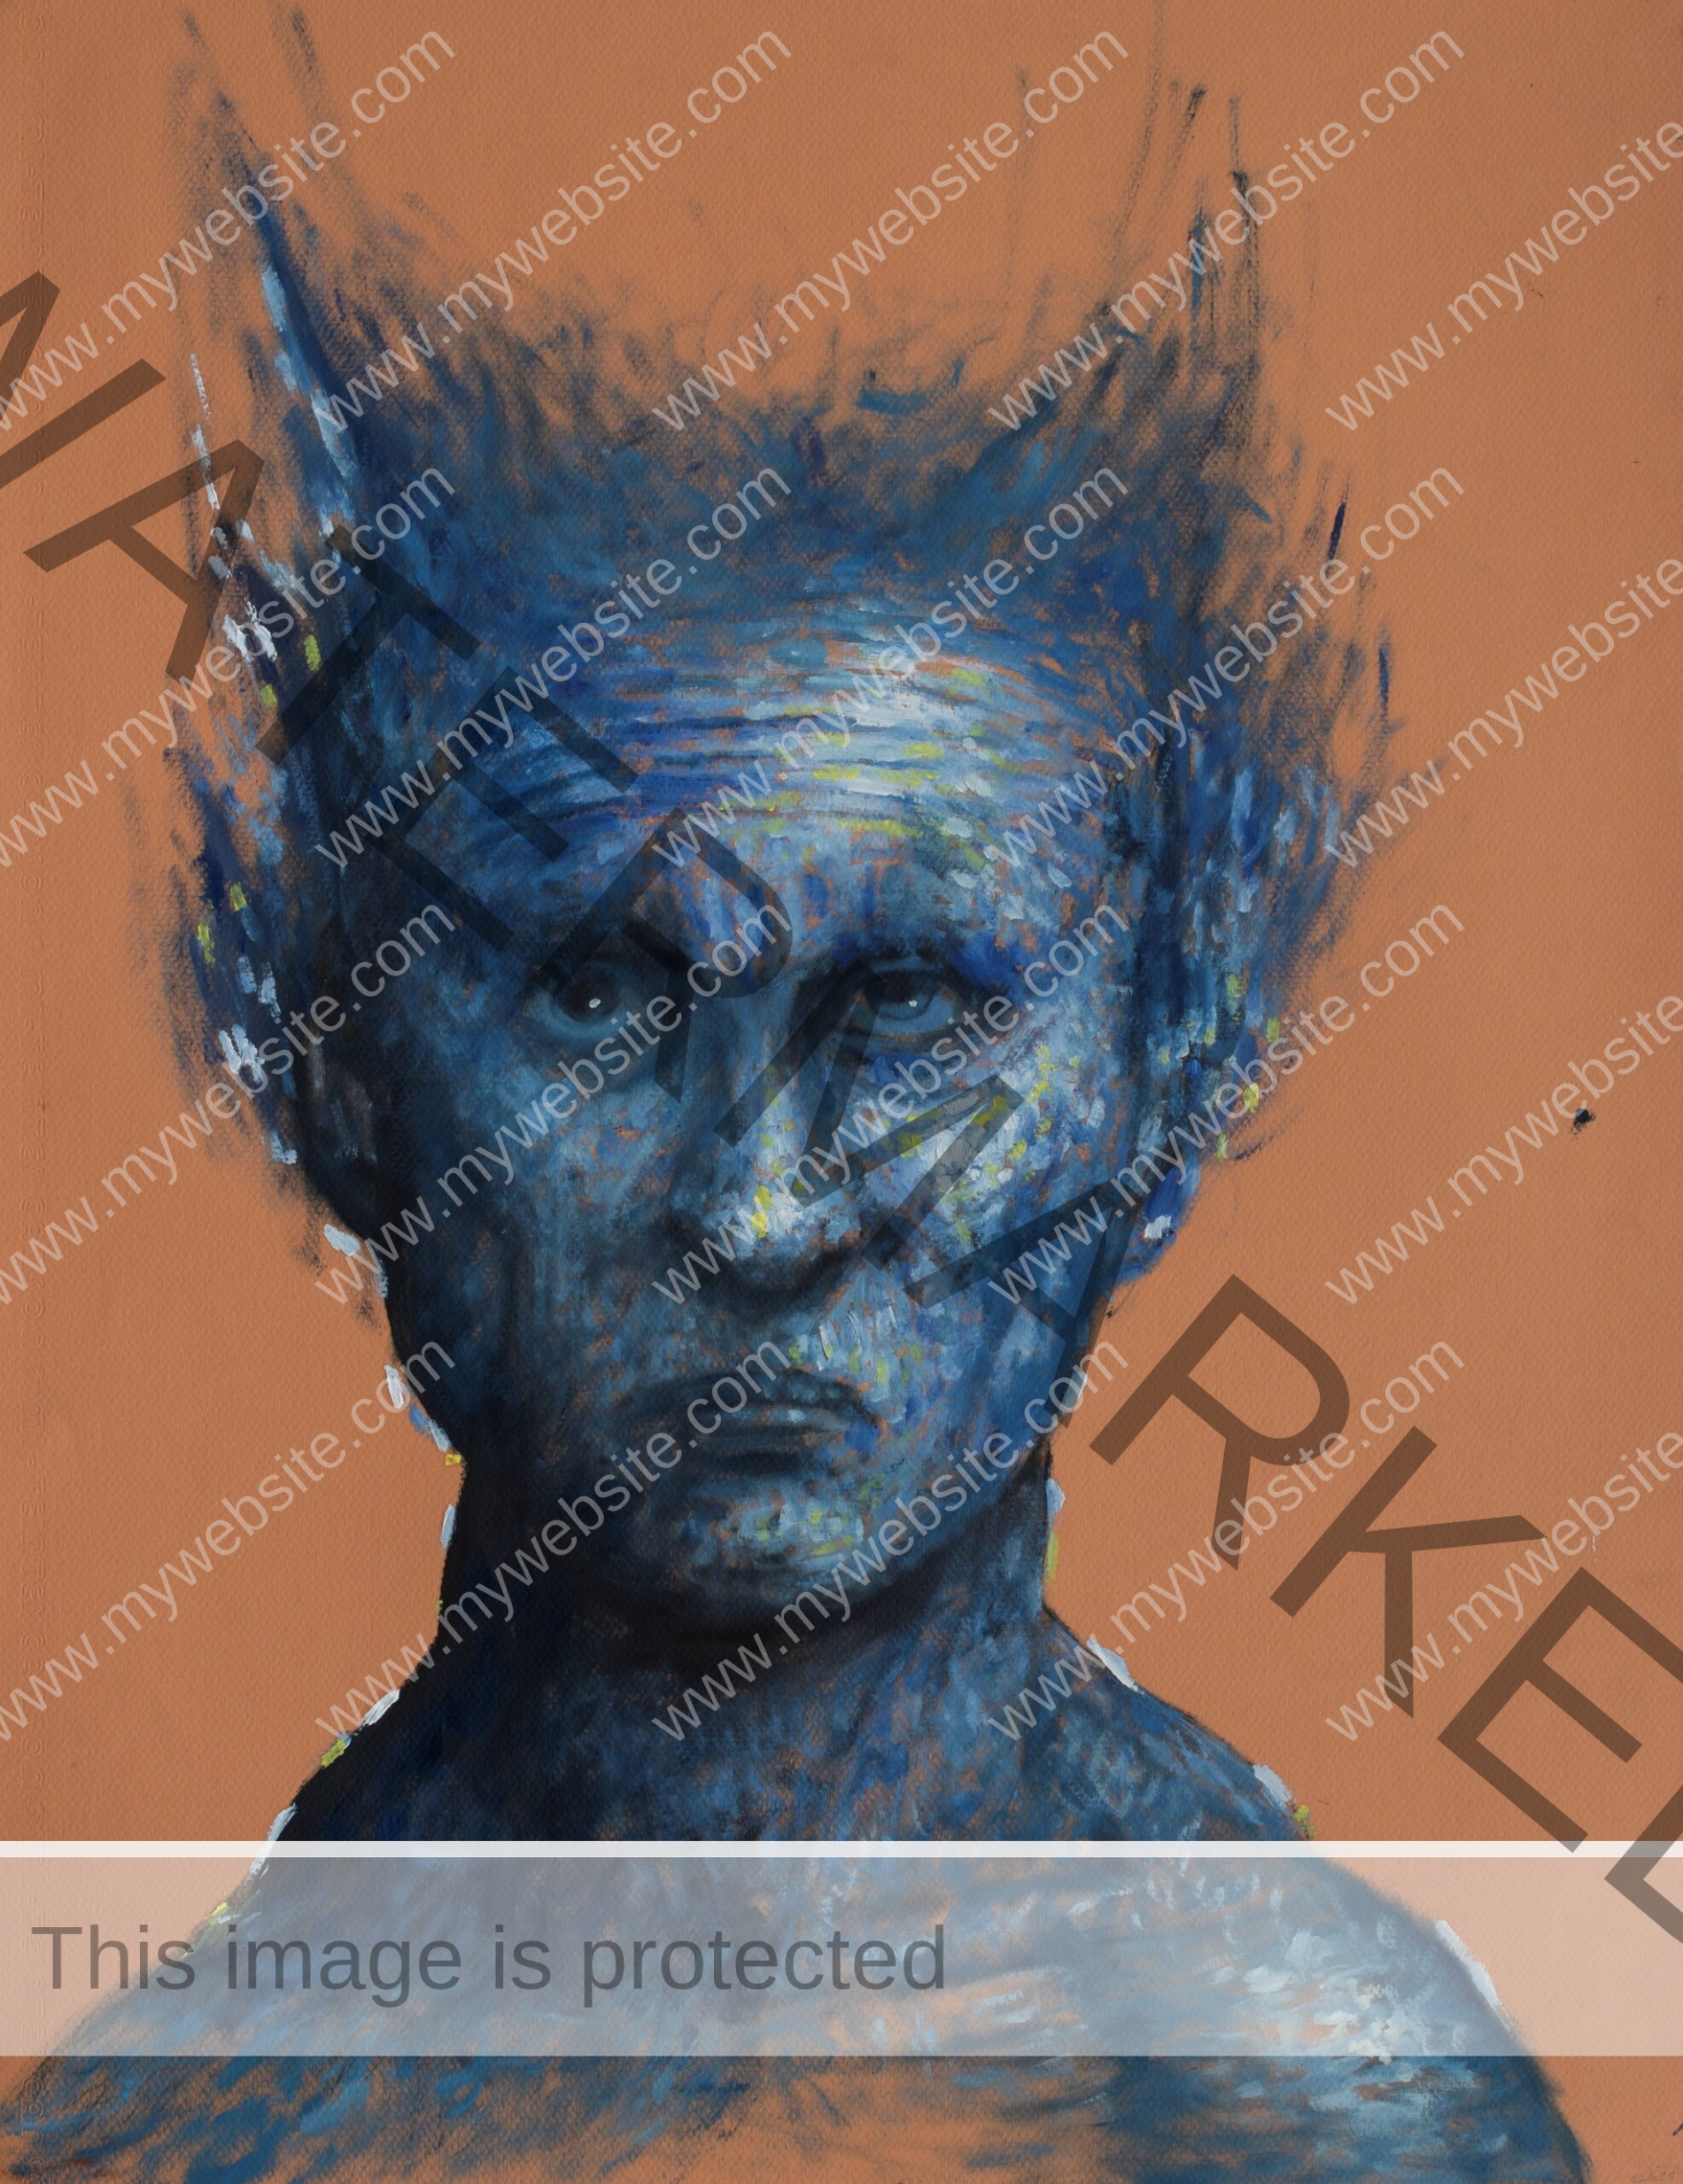 A crapula painting by Pablo Mejias, featuring a block, orange. background against which a head painted with blue and white tones is presented; the head is elongated as if he has horns. It's a sinister image commenting on indulgence and excess.